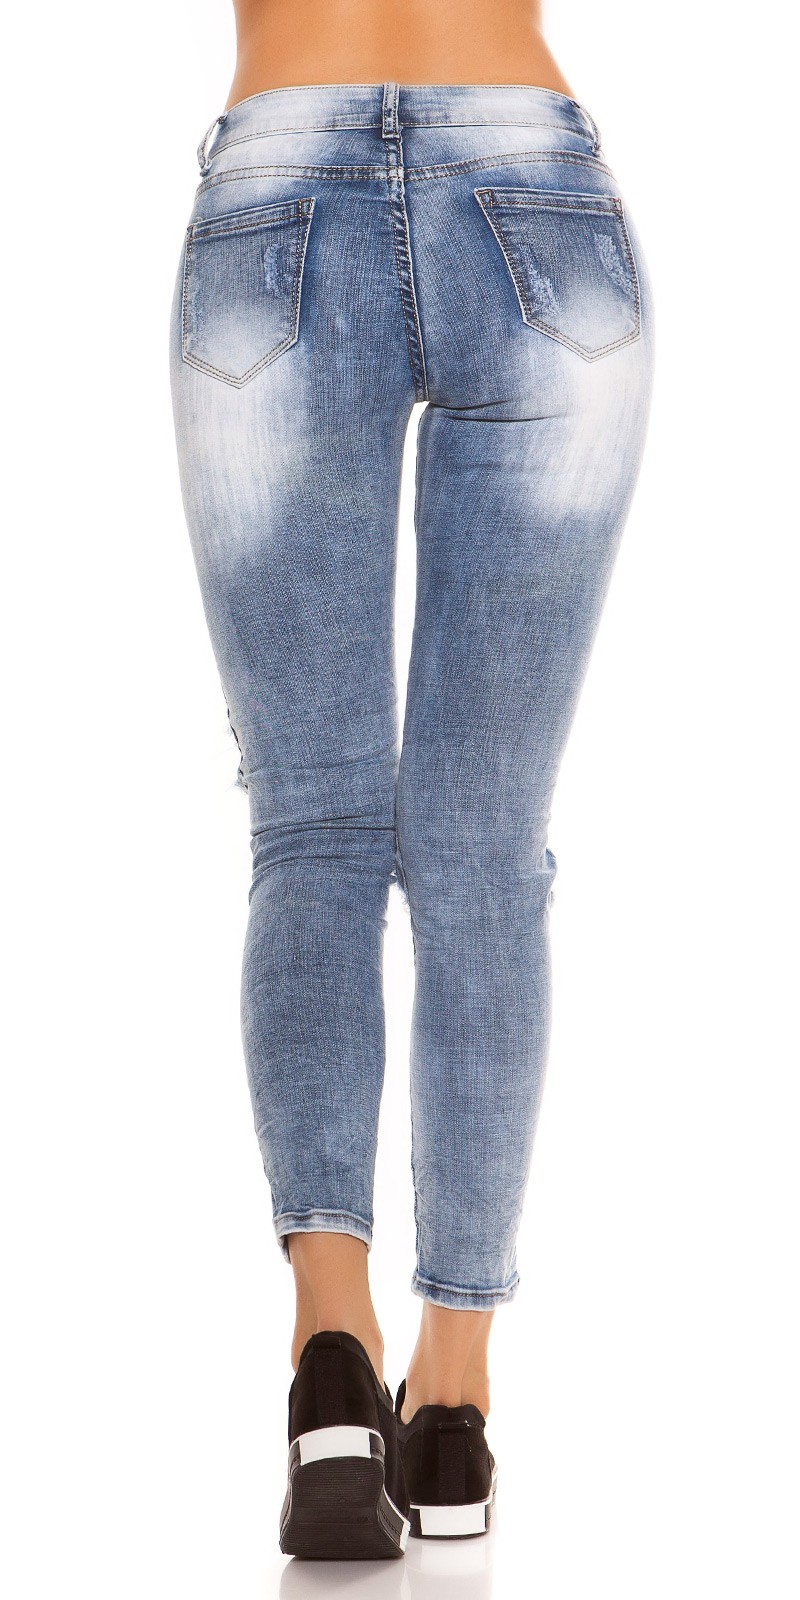 Jeans c/ rede 1